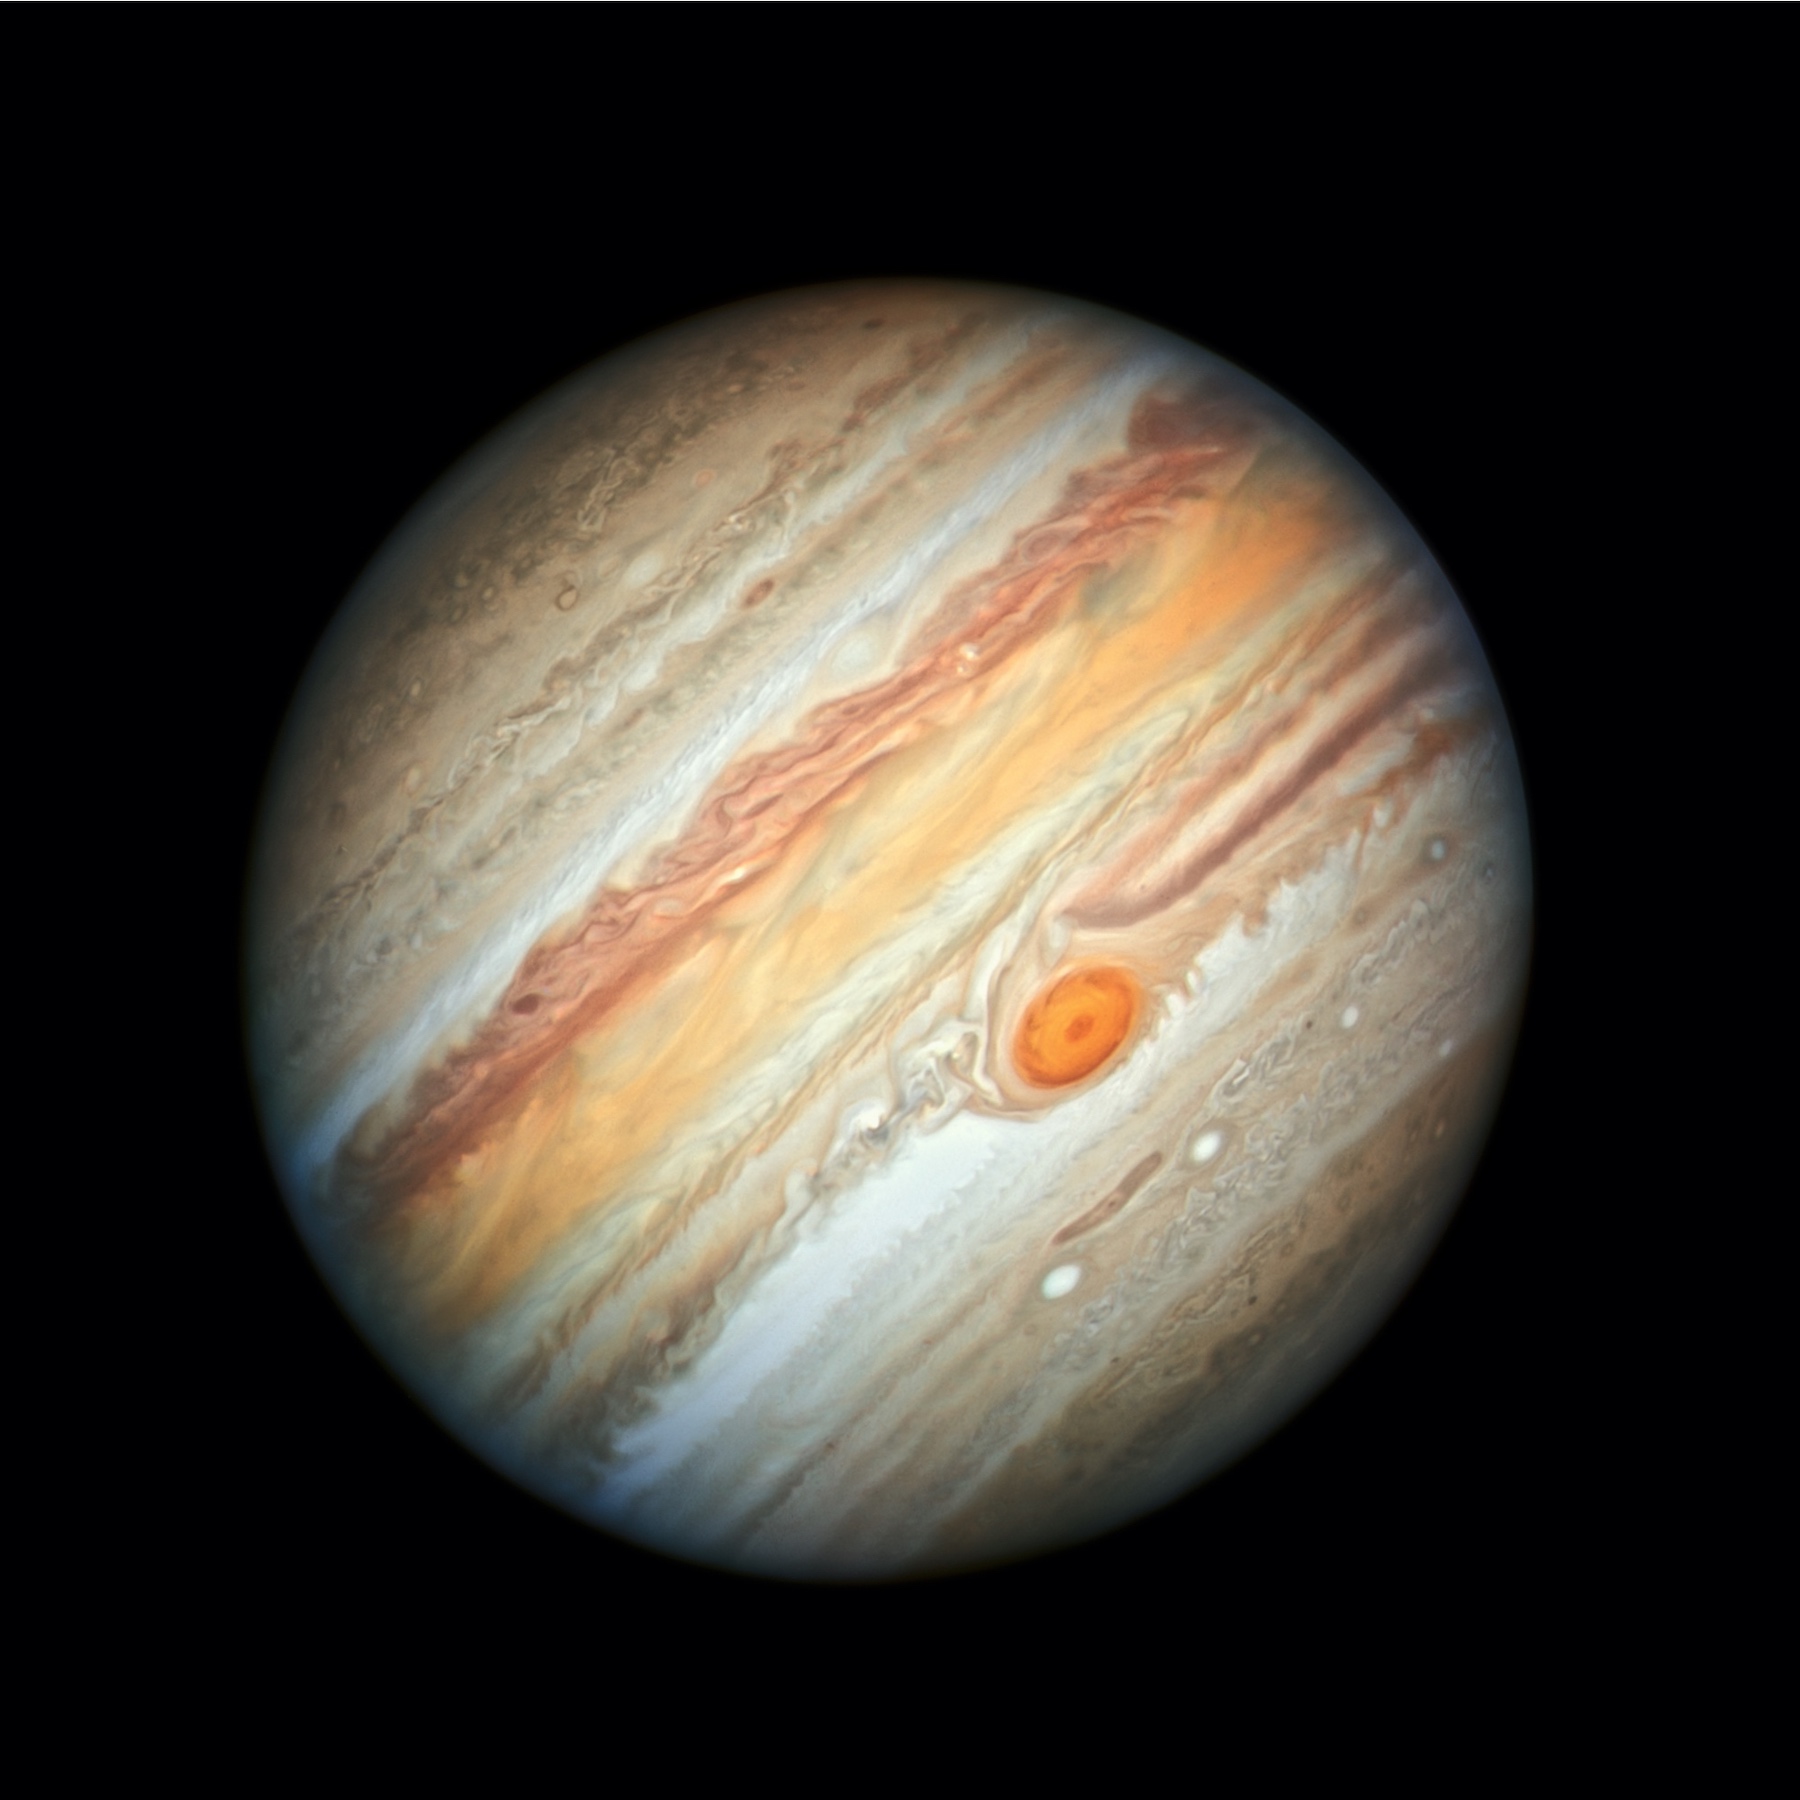 A picture of the orange planet Jupiter against a black background.